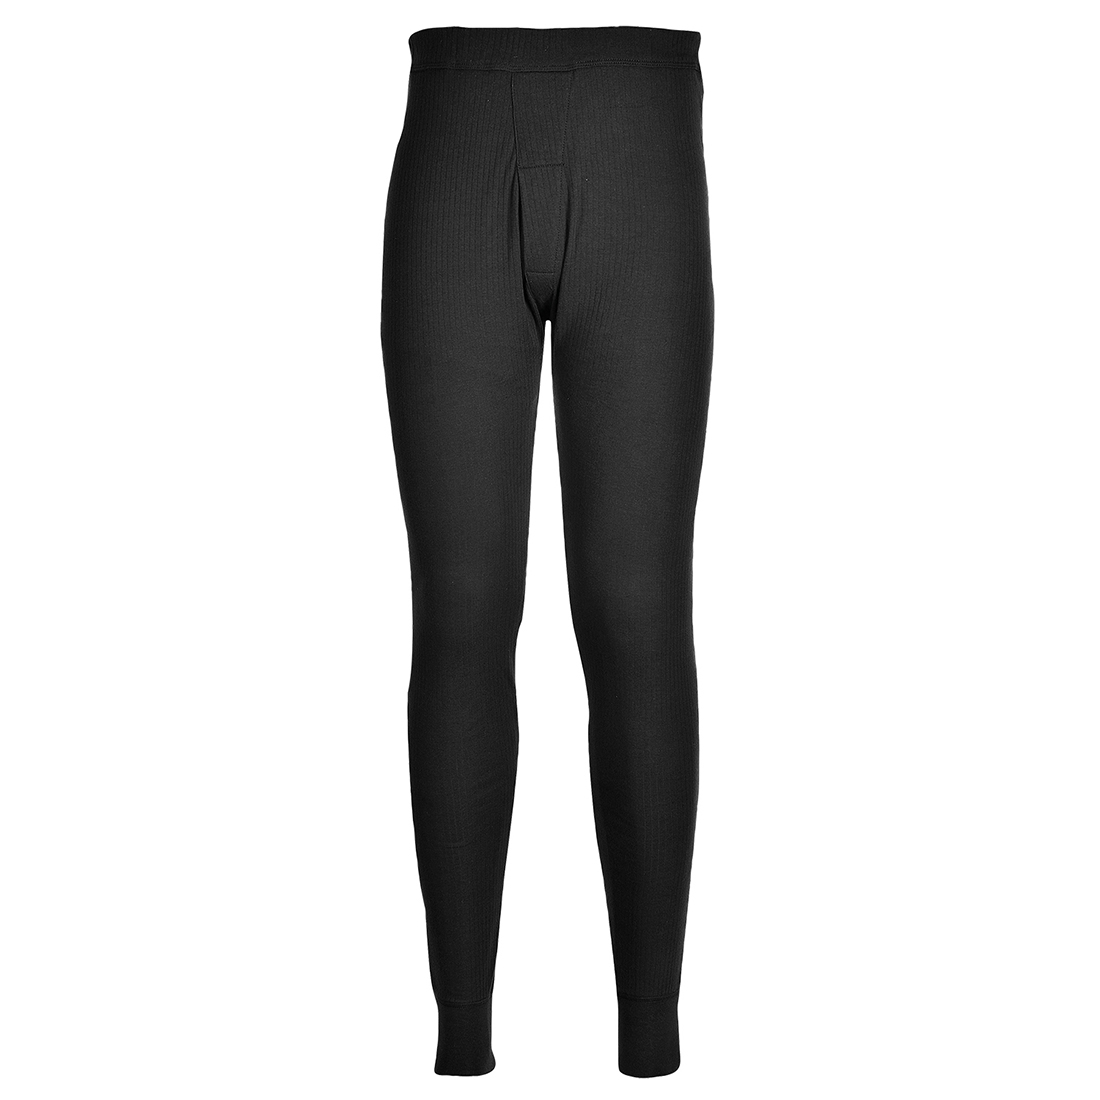 Example image of the thermal trousers B121 in black with a link to the article.